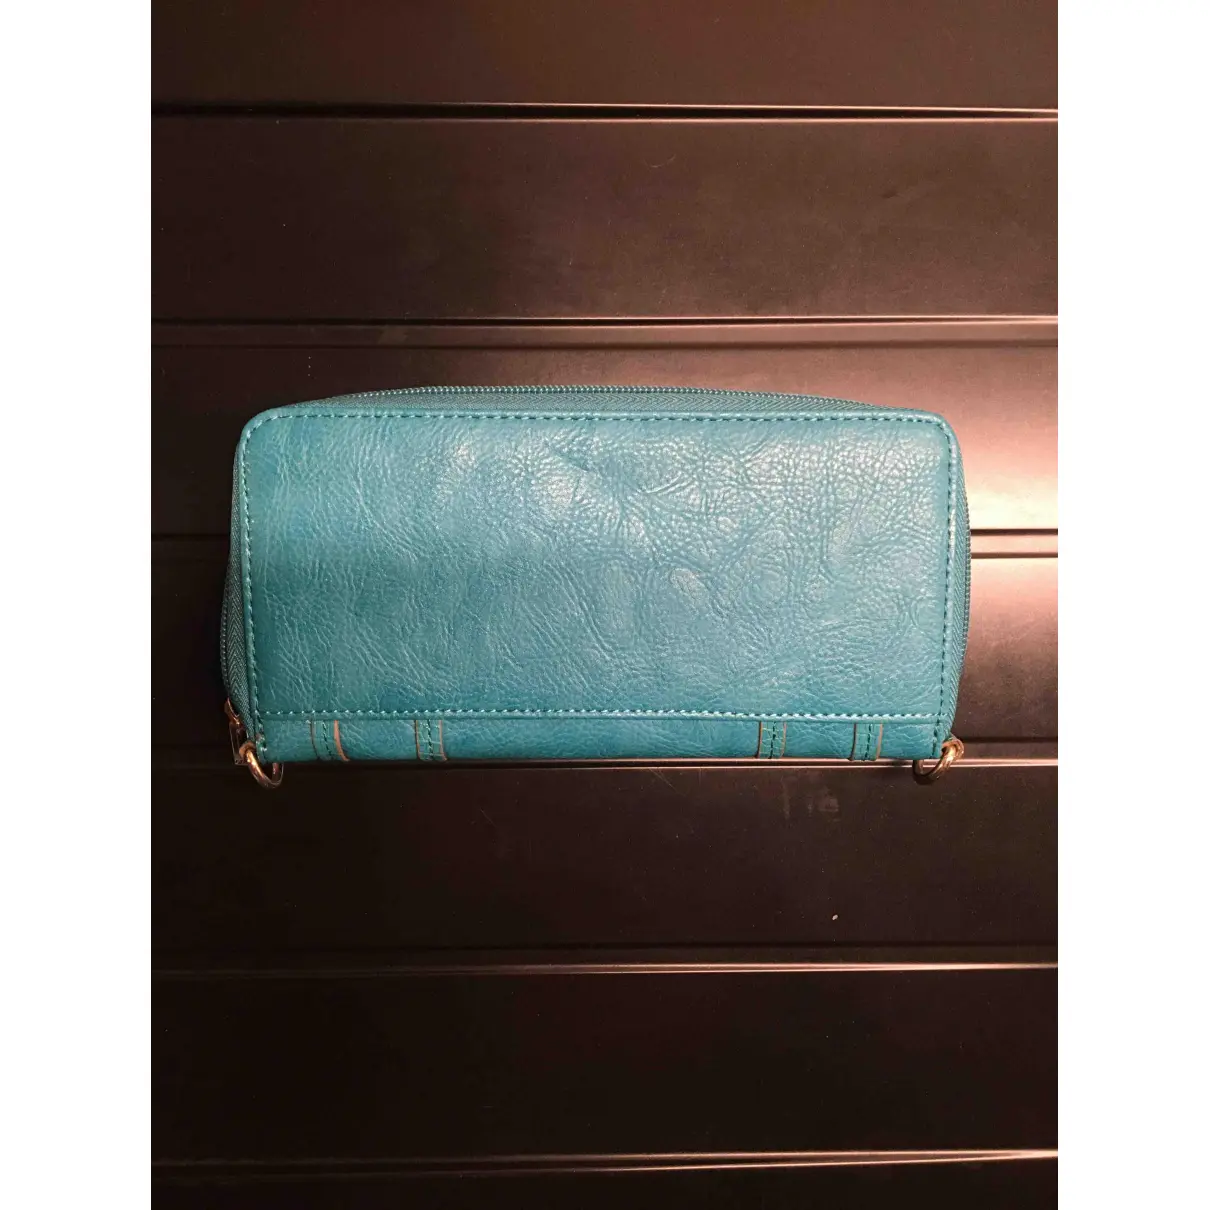 Buy GUESS Leather wallet online